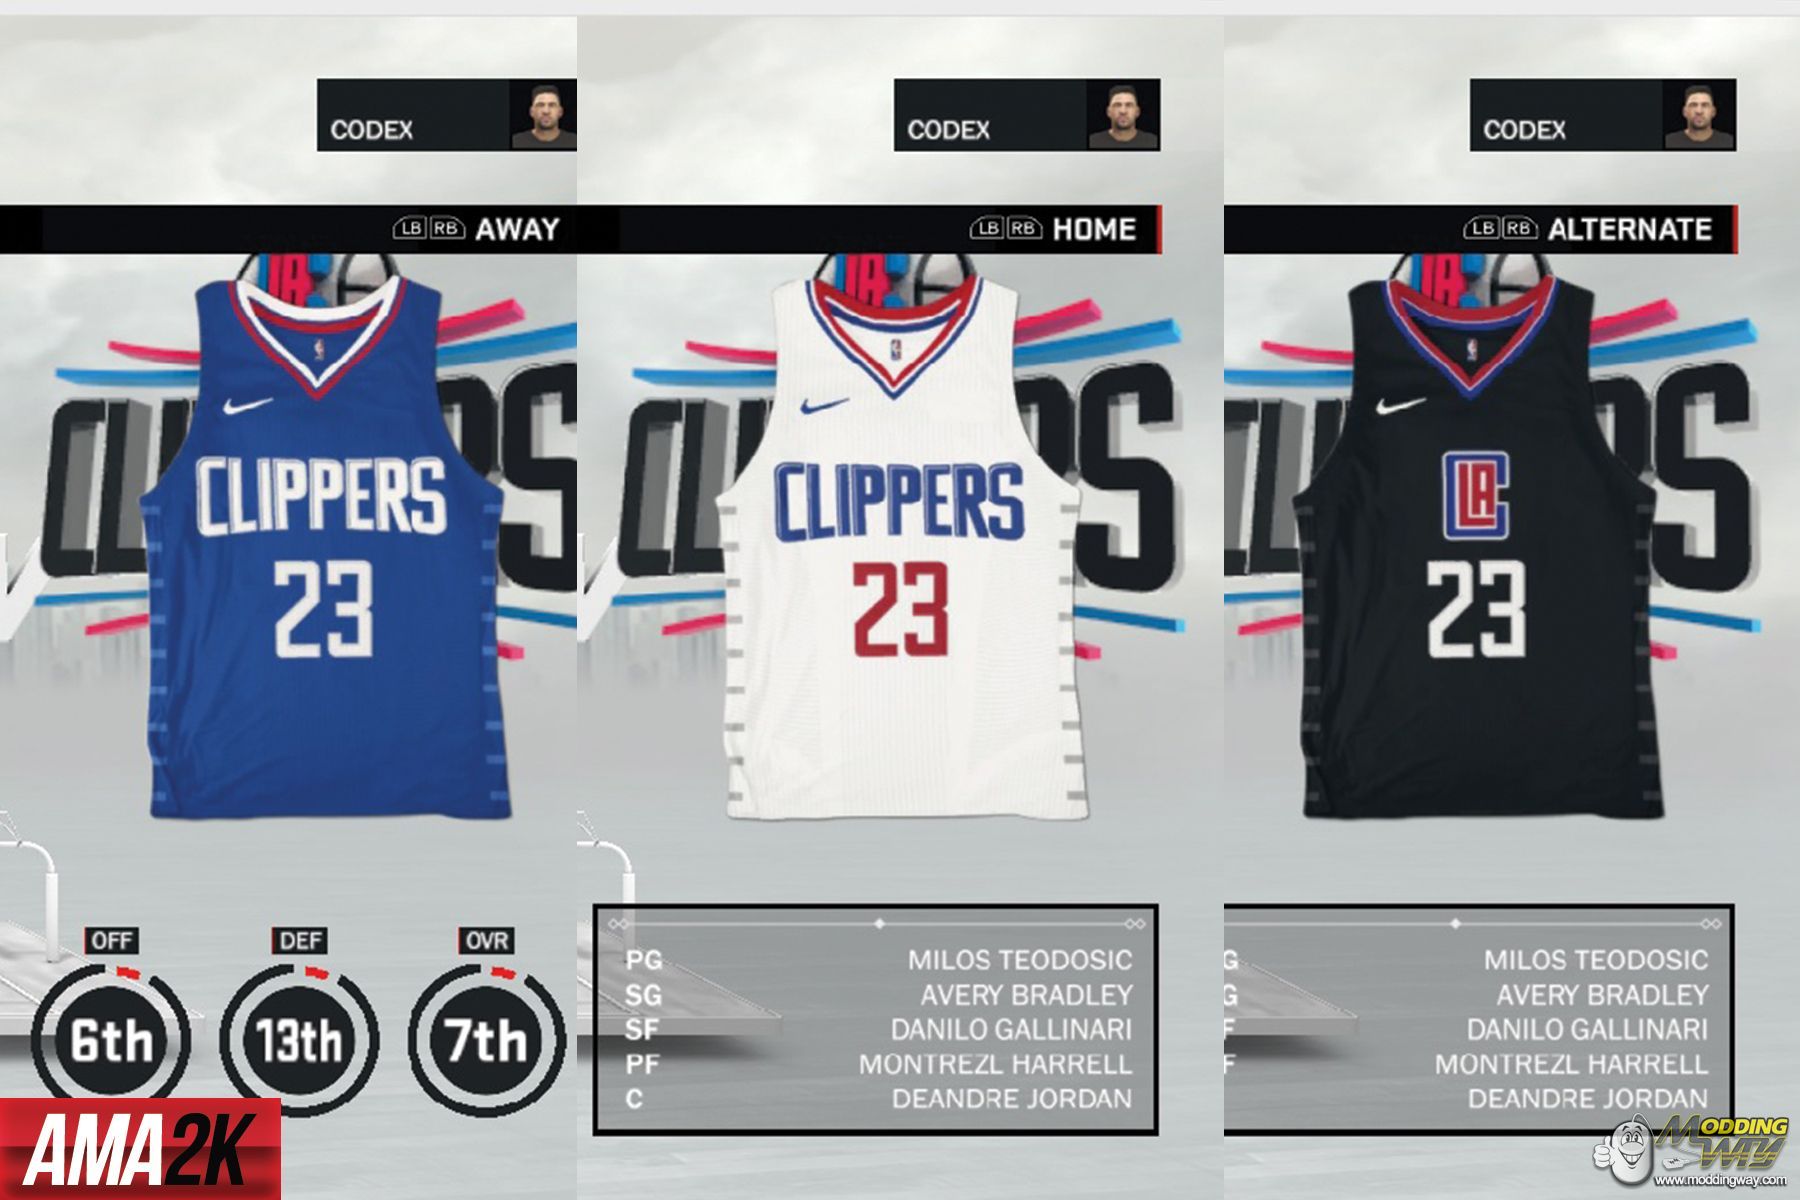 2018 clippers jersey